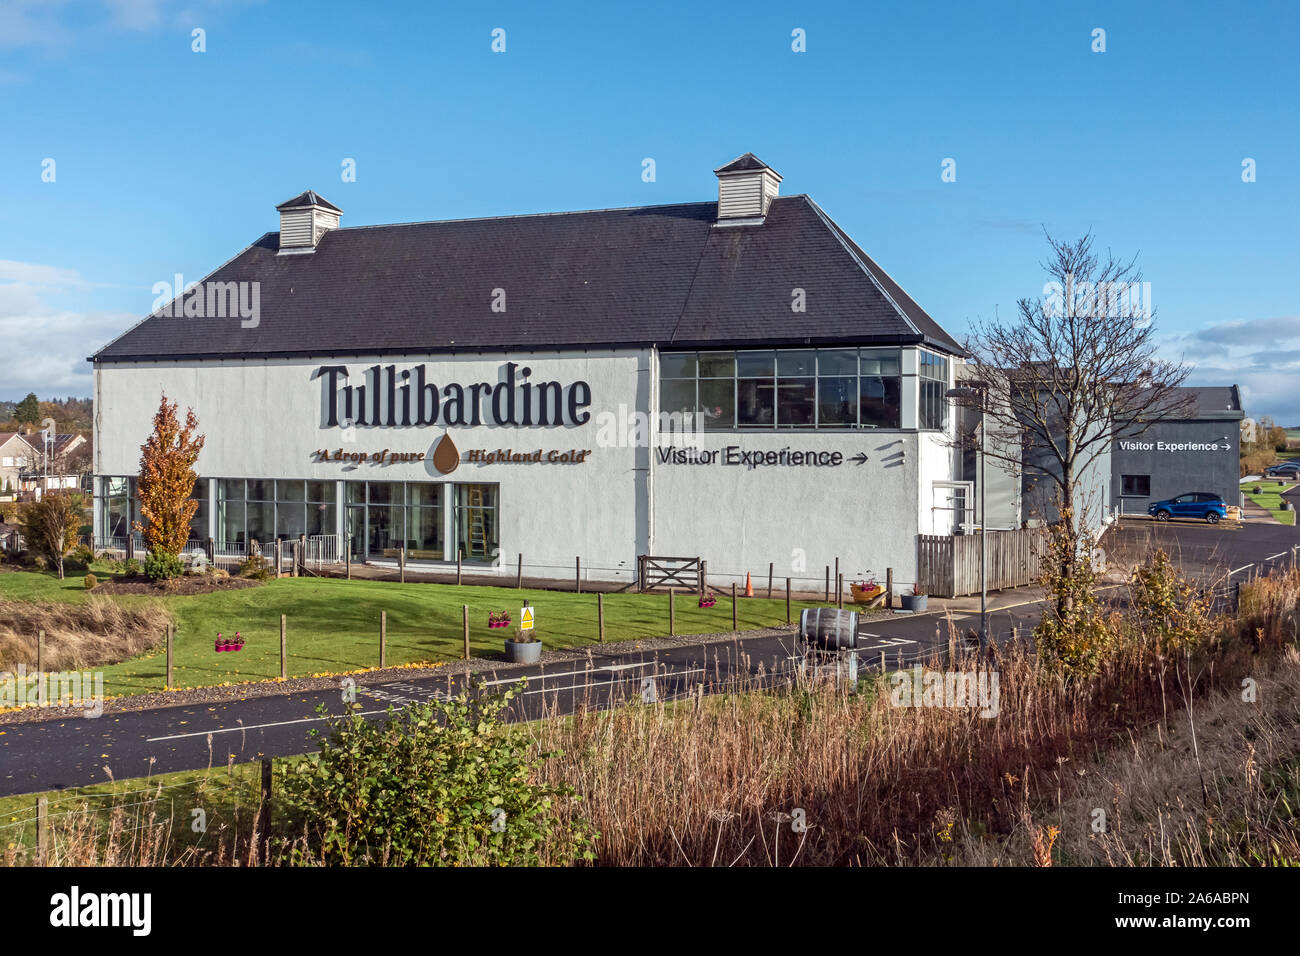 West facing view of Tullibardine distillery producing Scotch single malt whisky in Blackford Perth and Kinross Scotland UK beside A9 on right Stock Photo